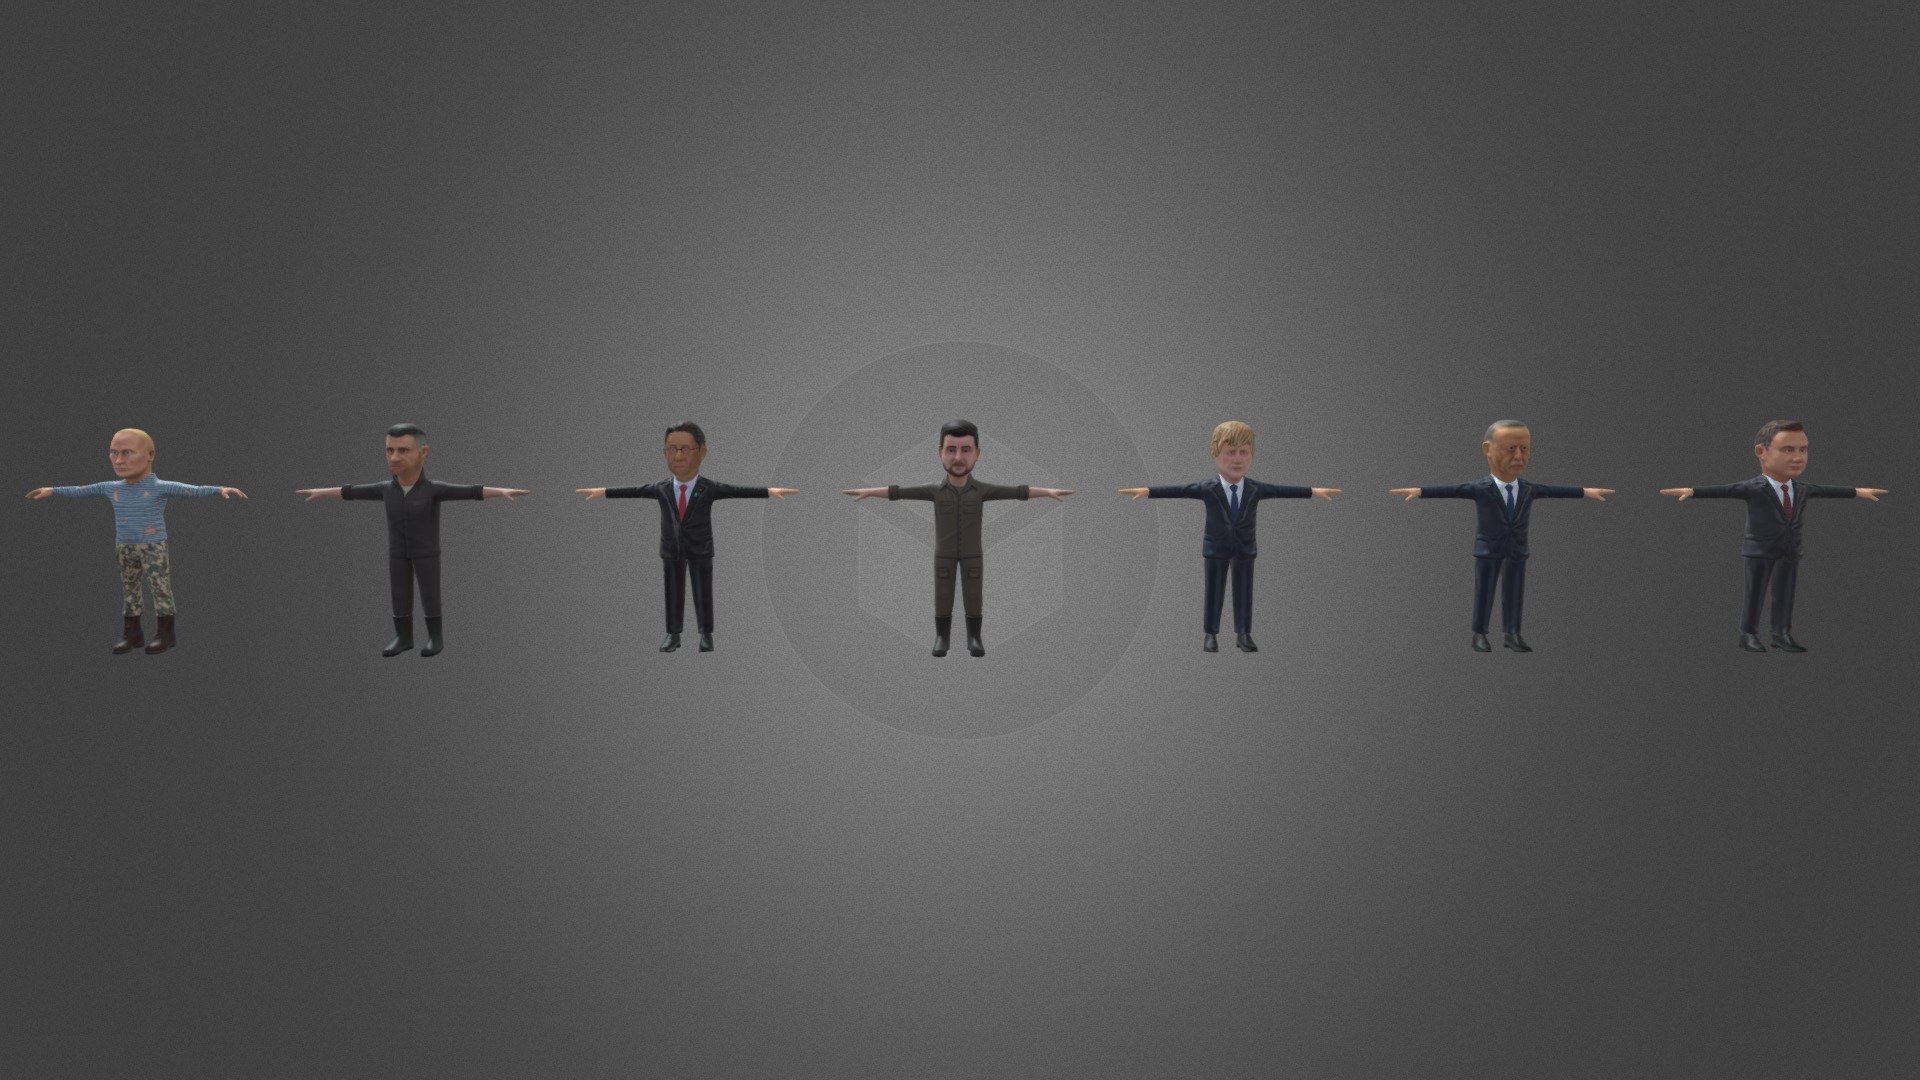 Low-poly 3D models of politicians. This asset presents 7 3D models of politicians: Vladimir Zelensky, Vladimir Putin, Vitali Klitschko, Andrzej Duda, Recep Erdogan, Boris Johnson, Fumio Kishida. These models have textures that are subject to adjustments. You can use these models in your projects.

Number of textures - 39
Texture dimensions - 512*512 px
Number of meshes/prefabs - 7
Types of materials and texture maps (e.g., PBR) - RGB - Politics Pack Caricature - Lowpoly 3D Model - Buy Royalty Free 3D model by VinAlex 3d model